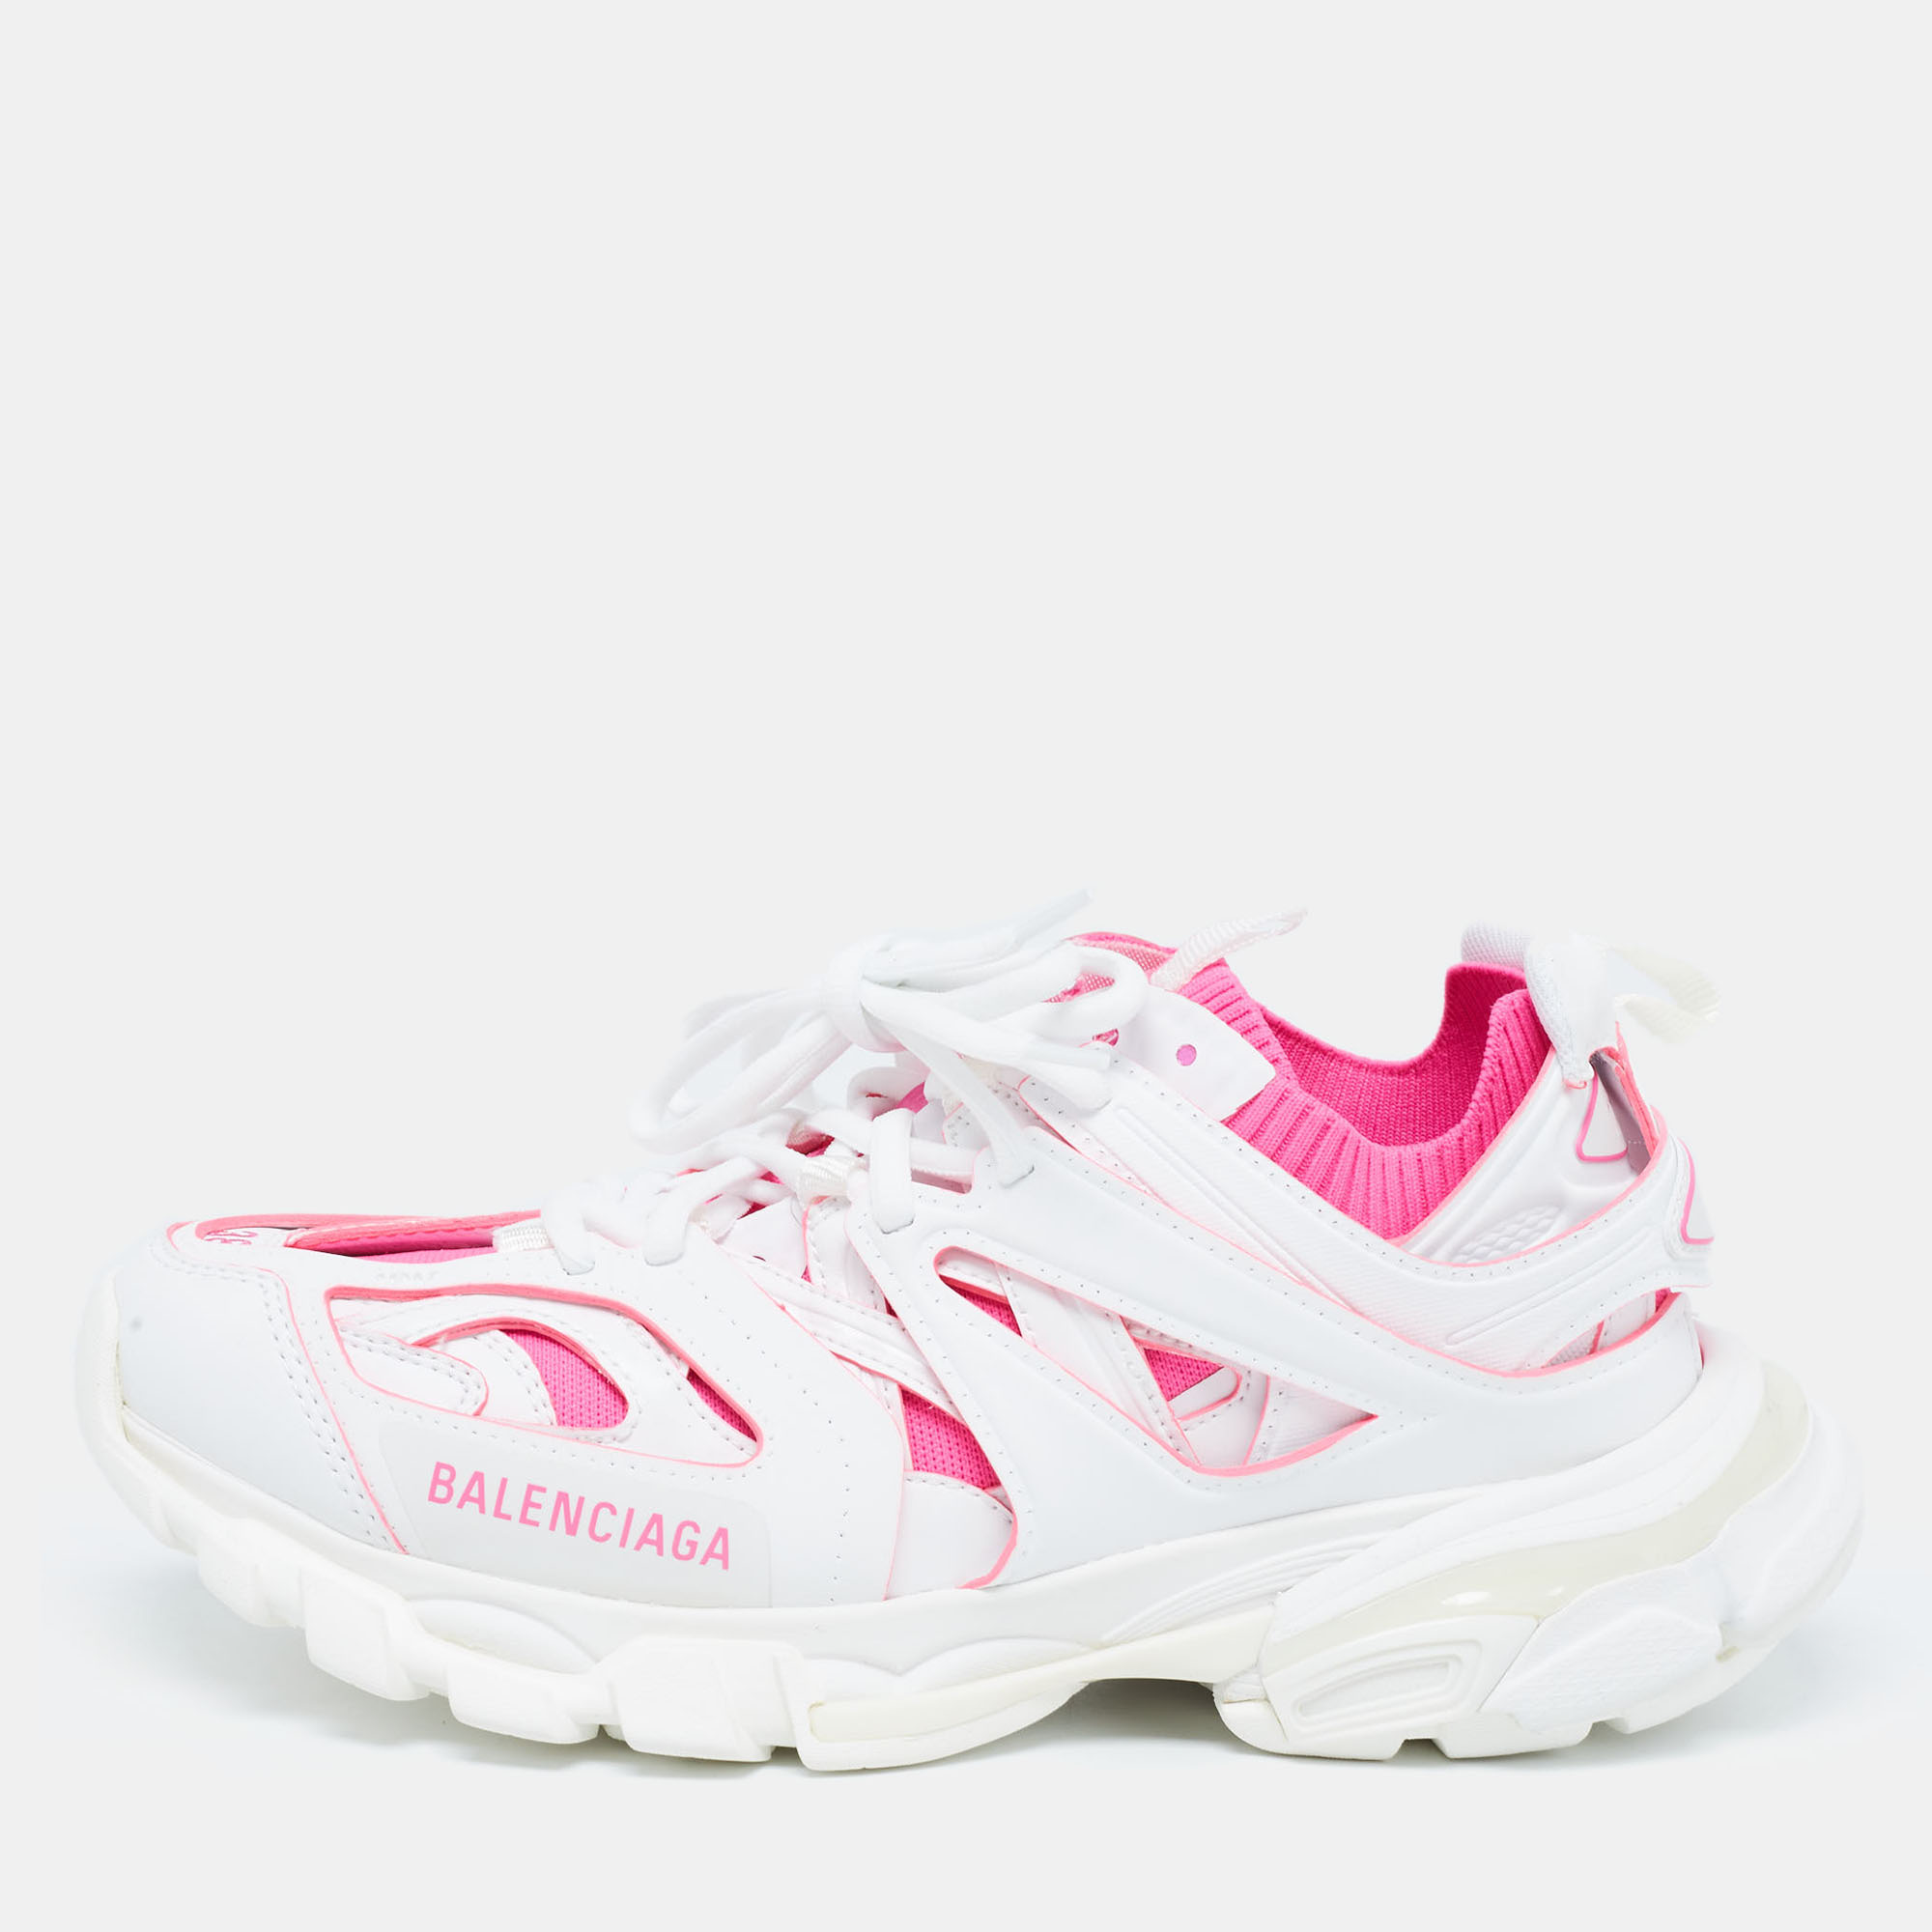 Pre-owned Balenciaga White/pink Rubber And Knit Fabric Track Sneakers Size 38